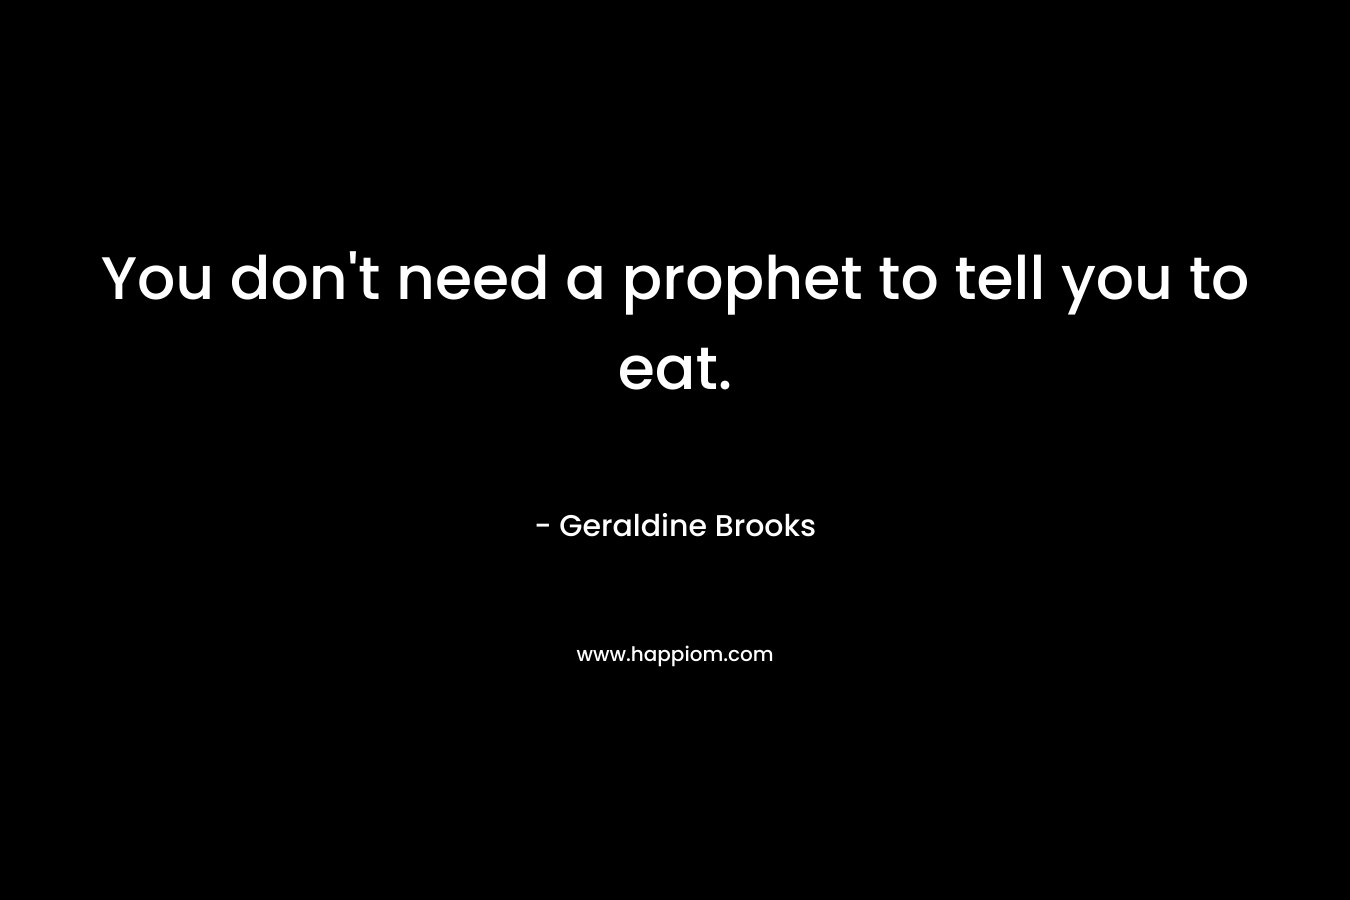 You don't need a prophet to tell you to eat.